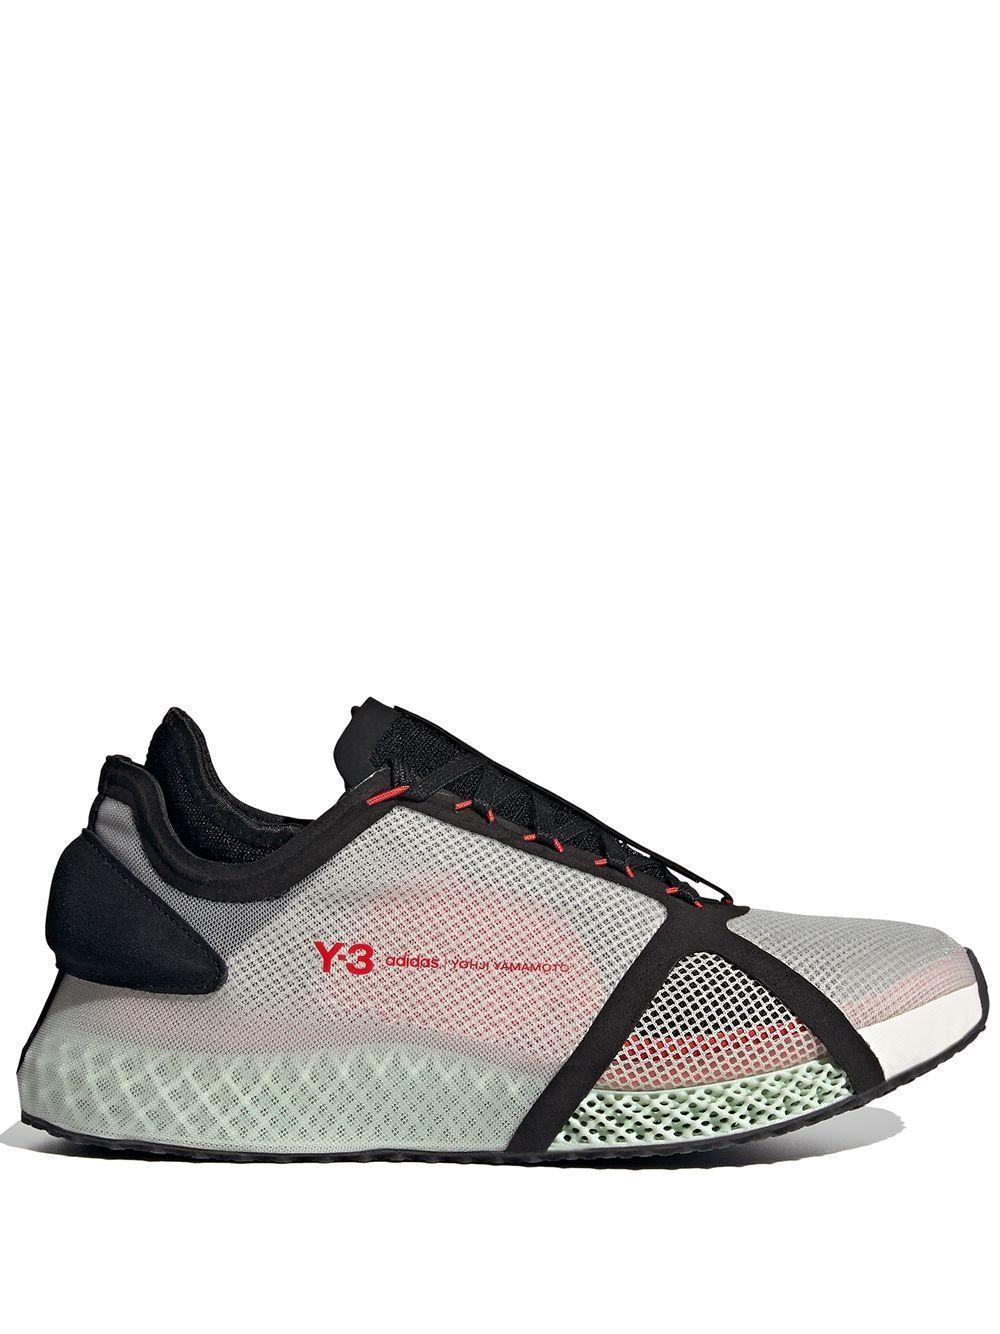 Y-3 X Adidas Runner 4d Iow Trainers in Grey (Gray) for Men - Save 